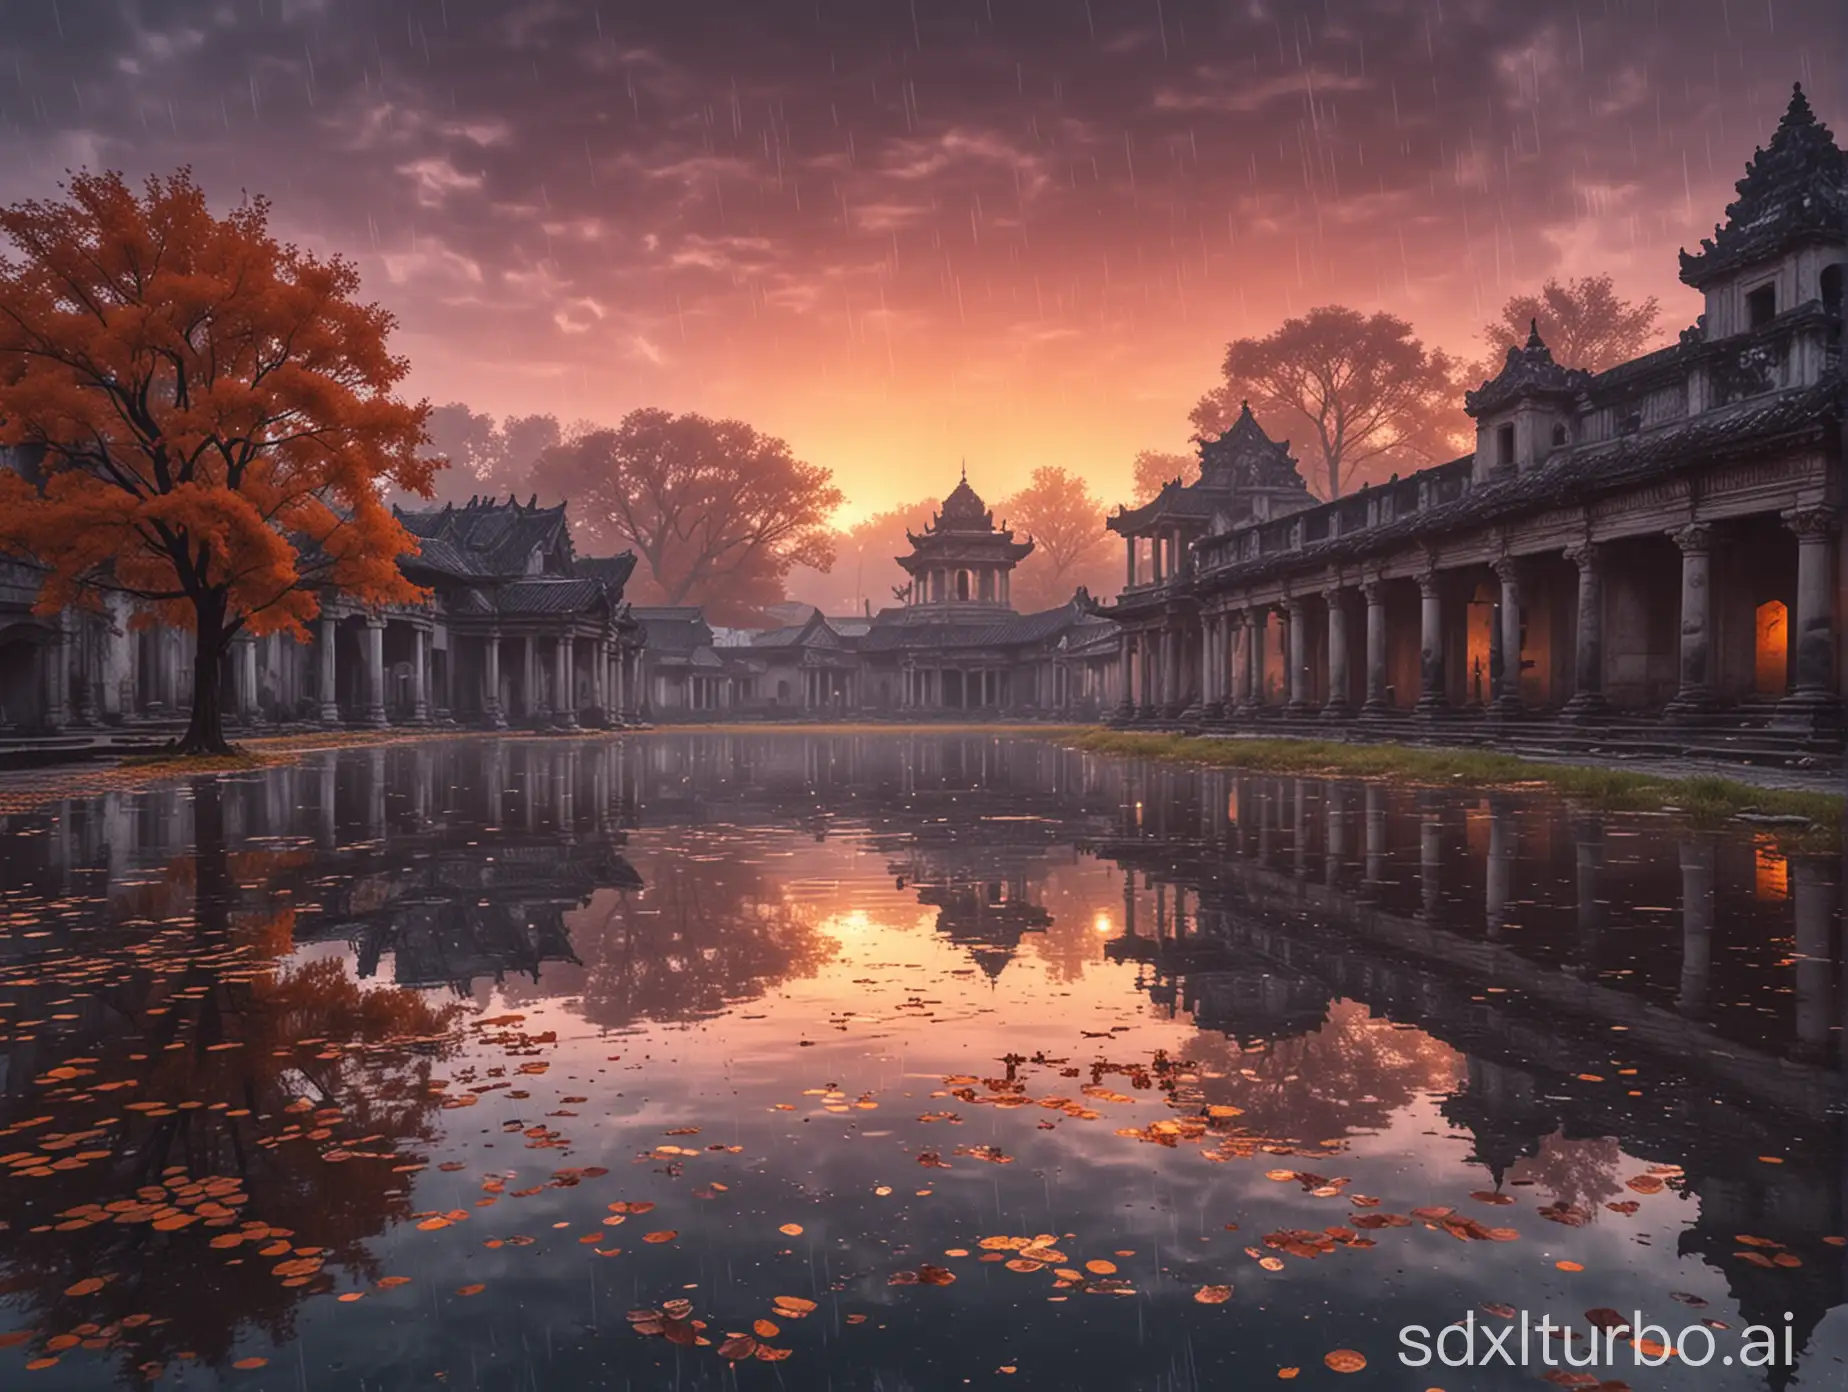 Twilight-Rain-Over-Ancient-Architecture-Serene-4K-Landscape-with-Harmonious-Water-and-Sky